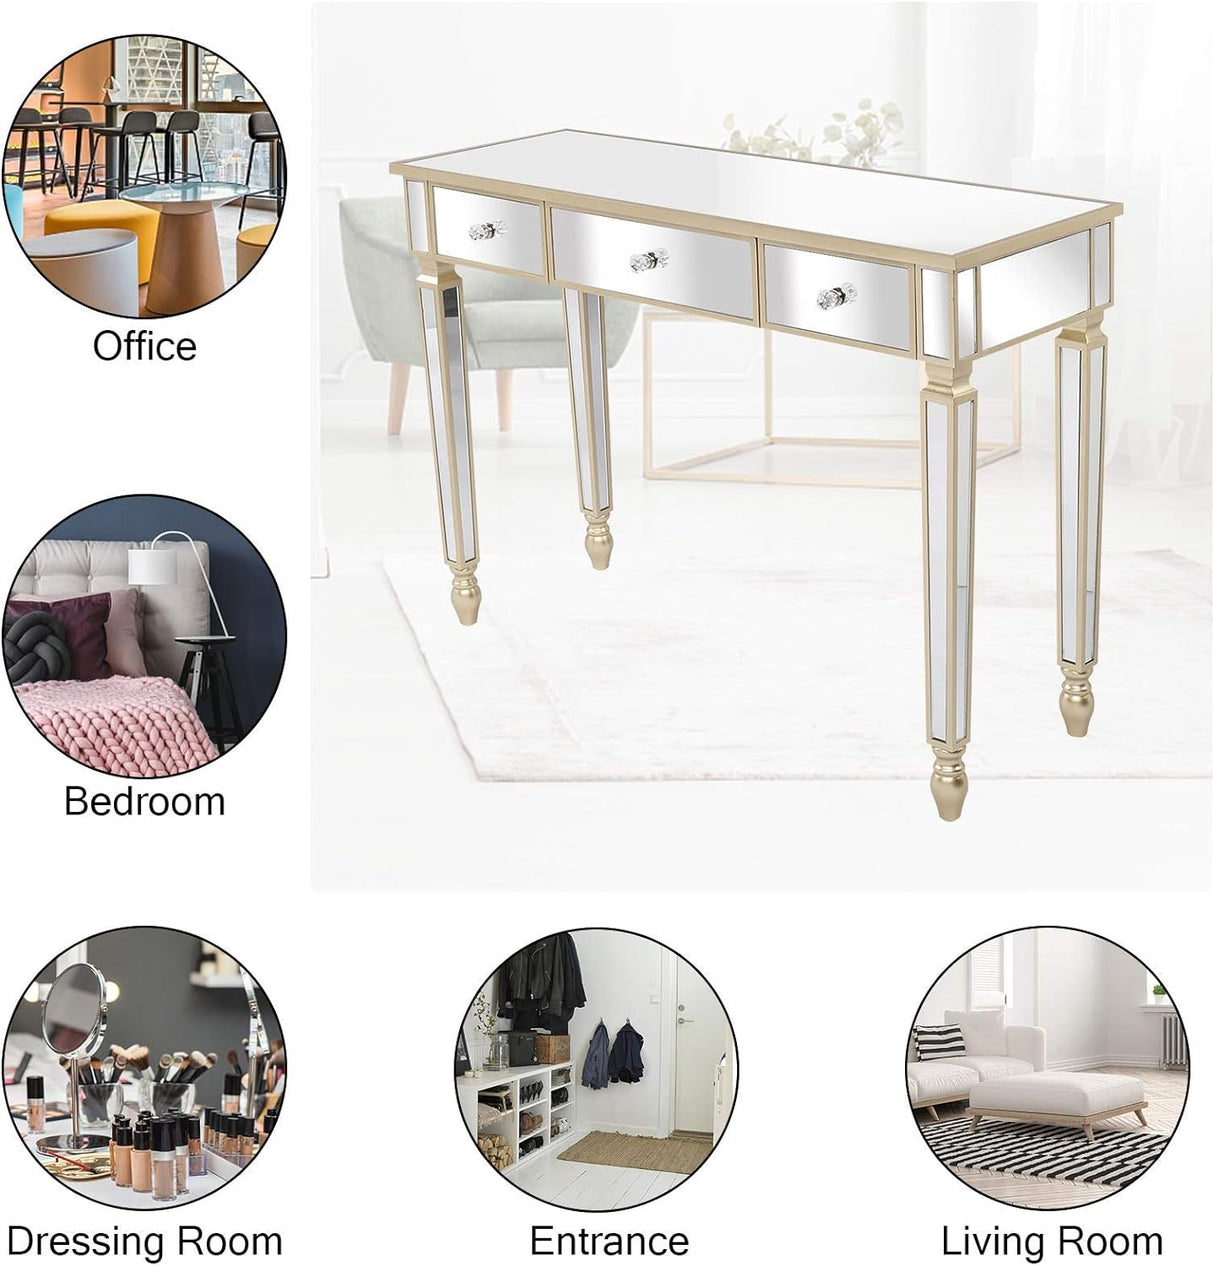 Mirrored Console Table,Mirrored Makeup Vanity Table Desk, 3 Drawer Media Console Table for Women Home Office Writing Desk Smooth Finish with Crystal-Style Knobs (Champagne Gold)